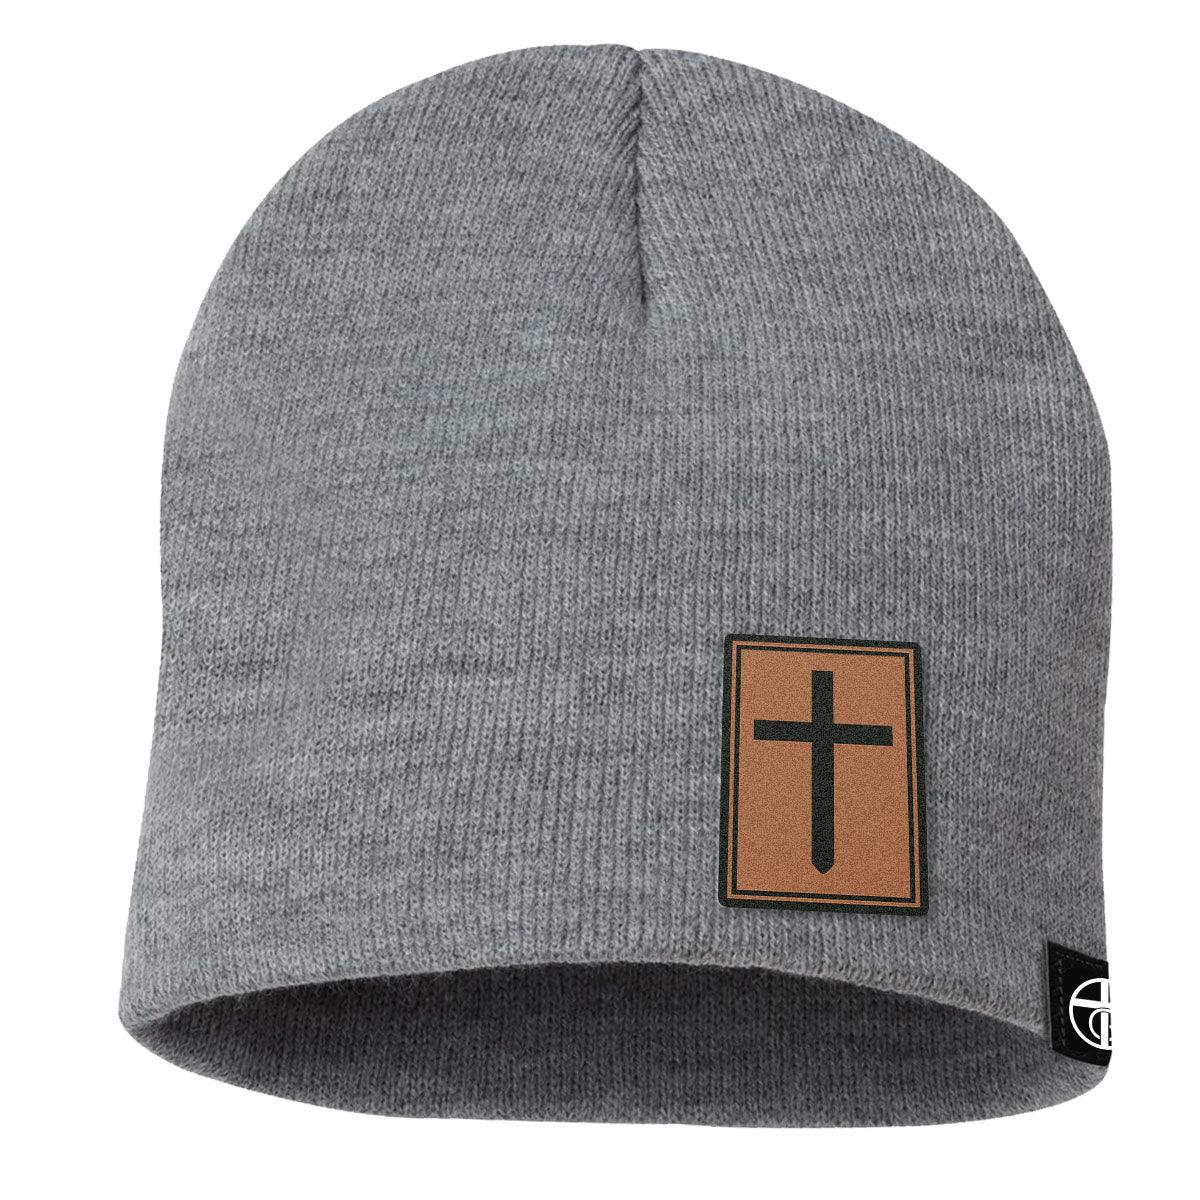 Cross Lower Left Leather Patch Beanies